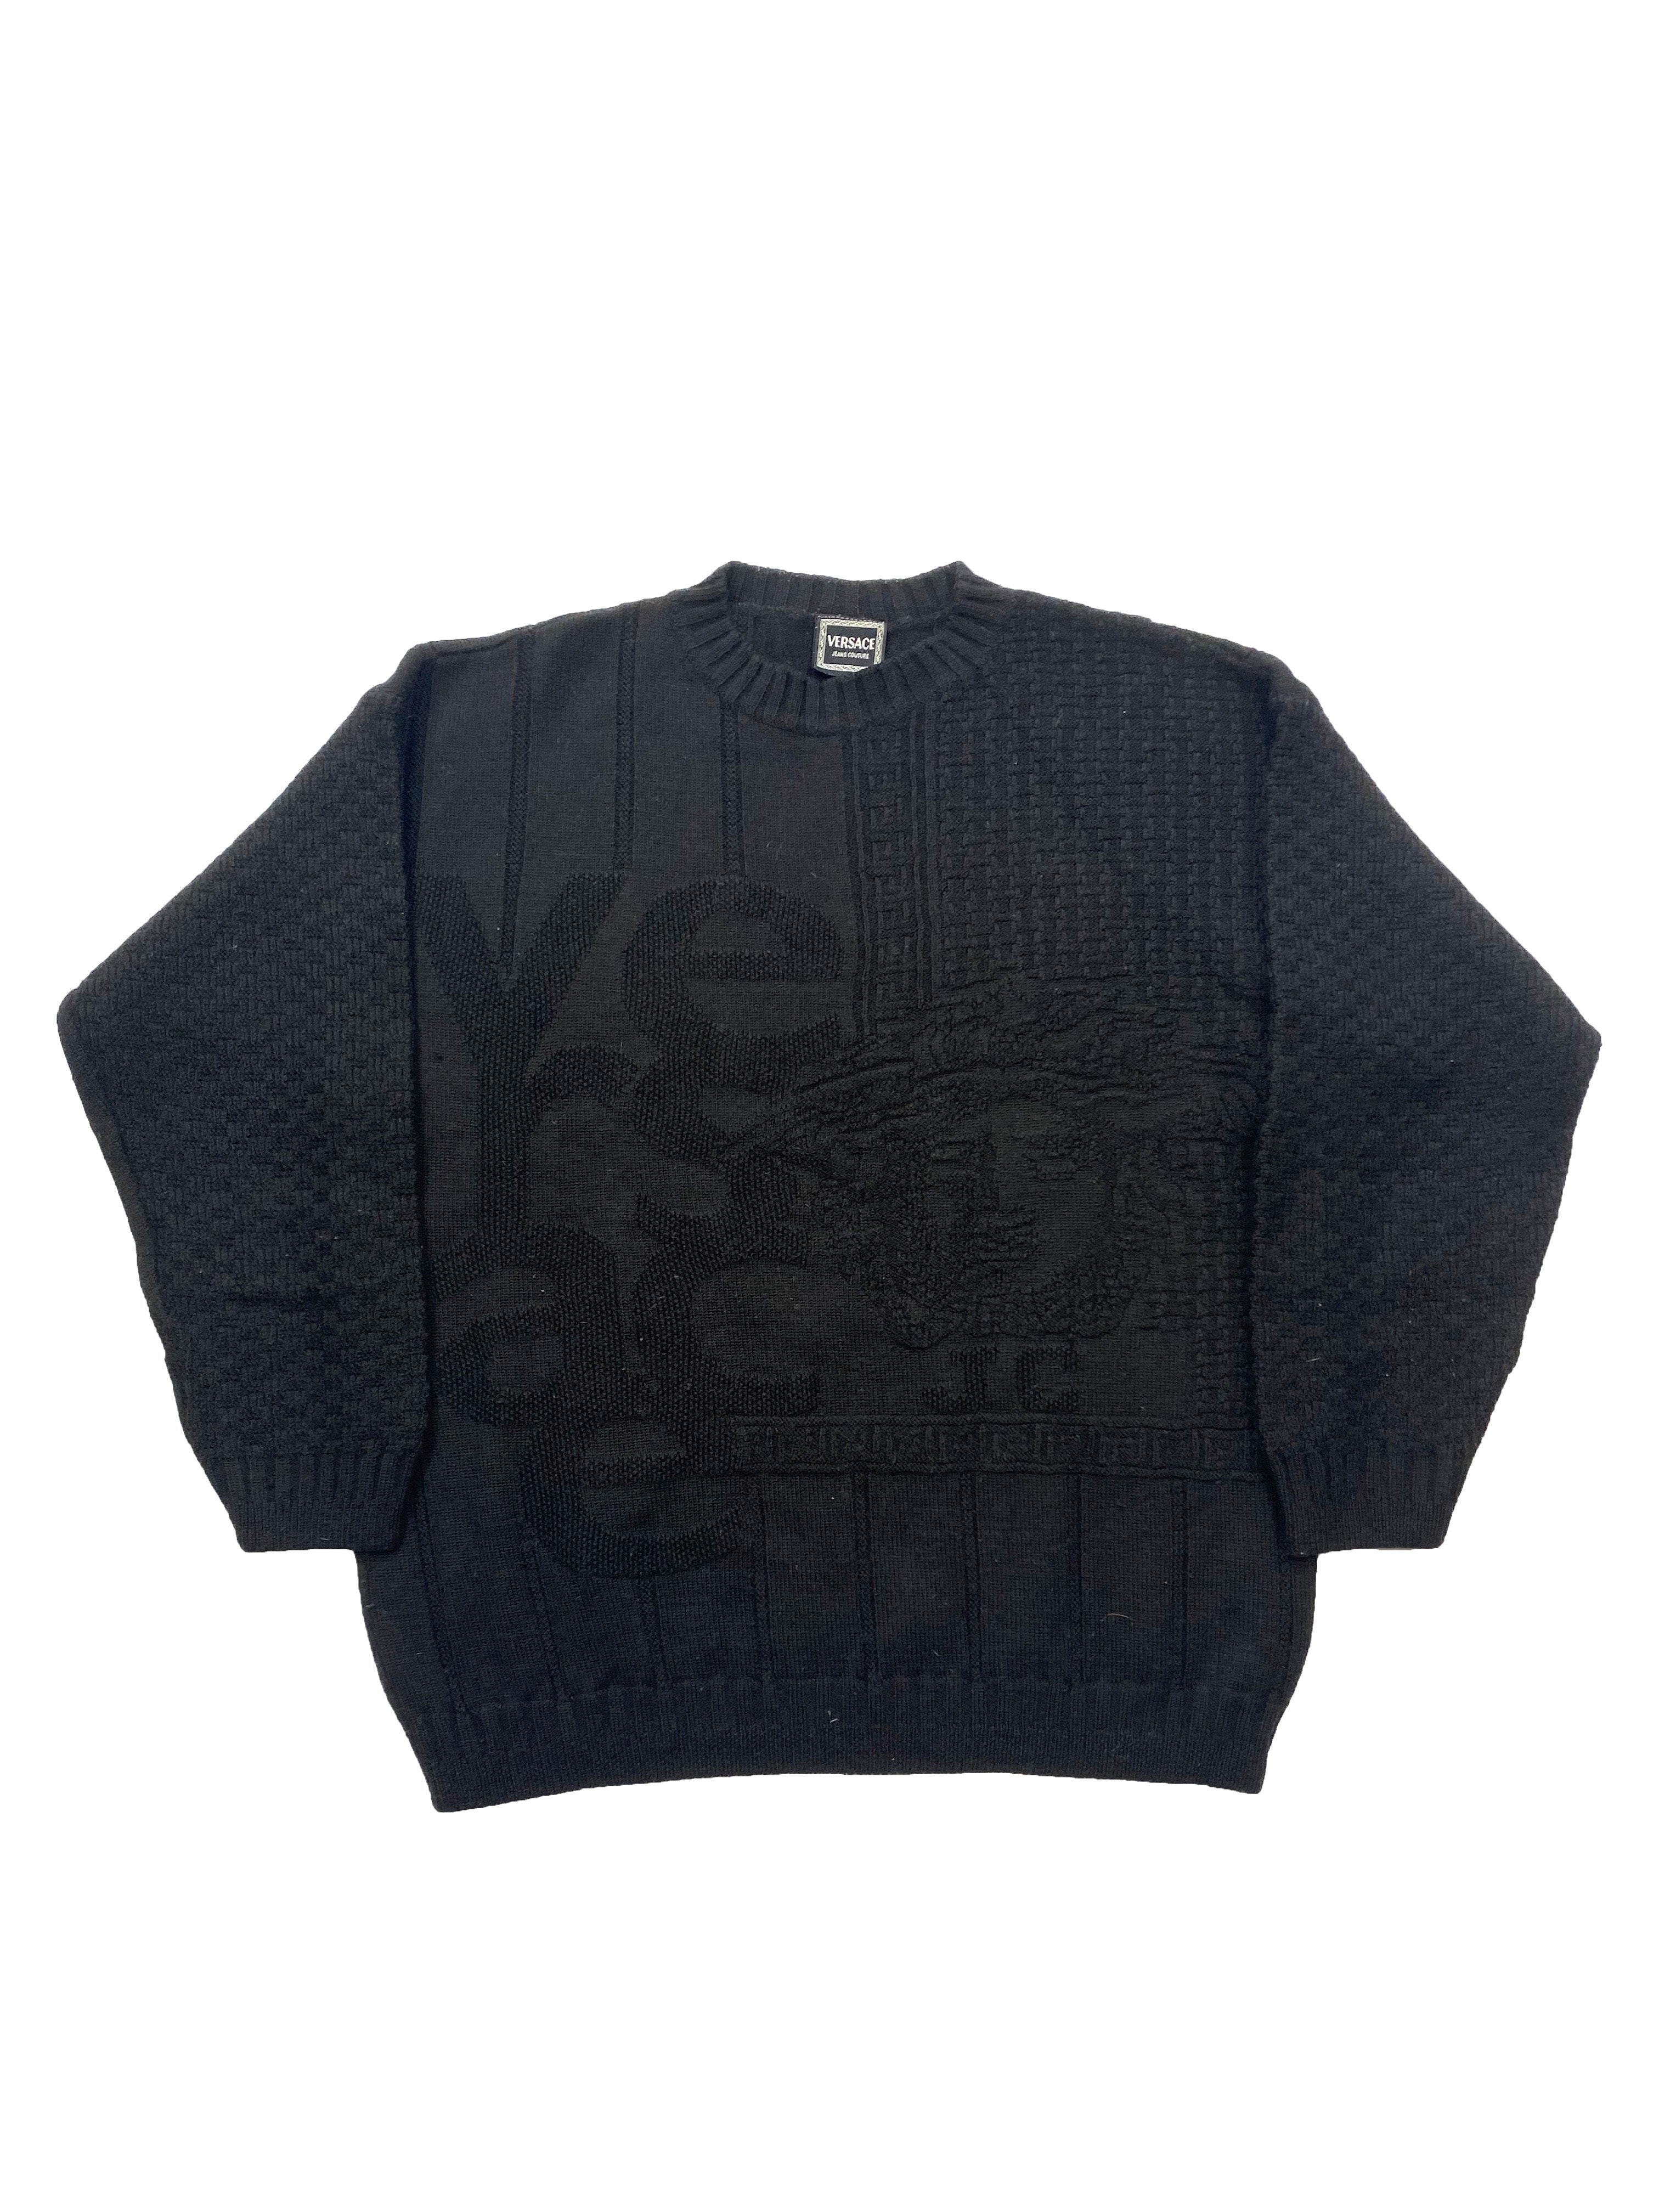 Versace Jeans Couture Medusa Spell Out Jumper 90's